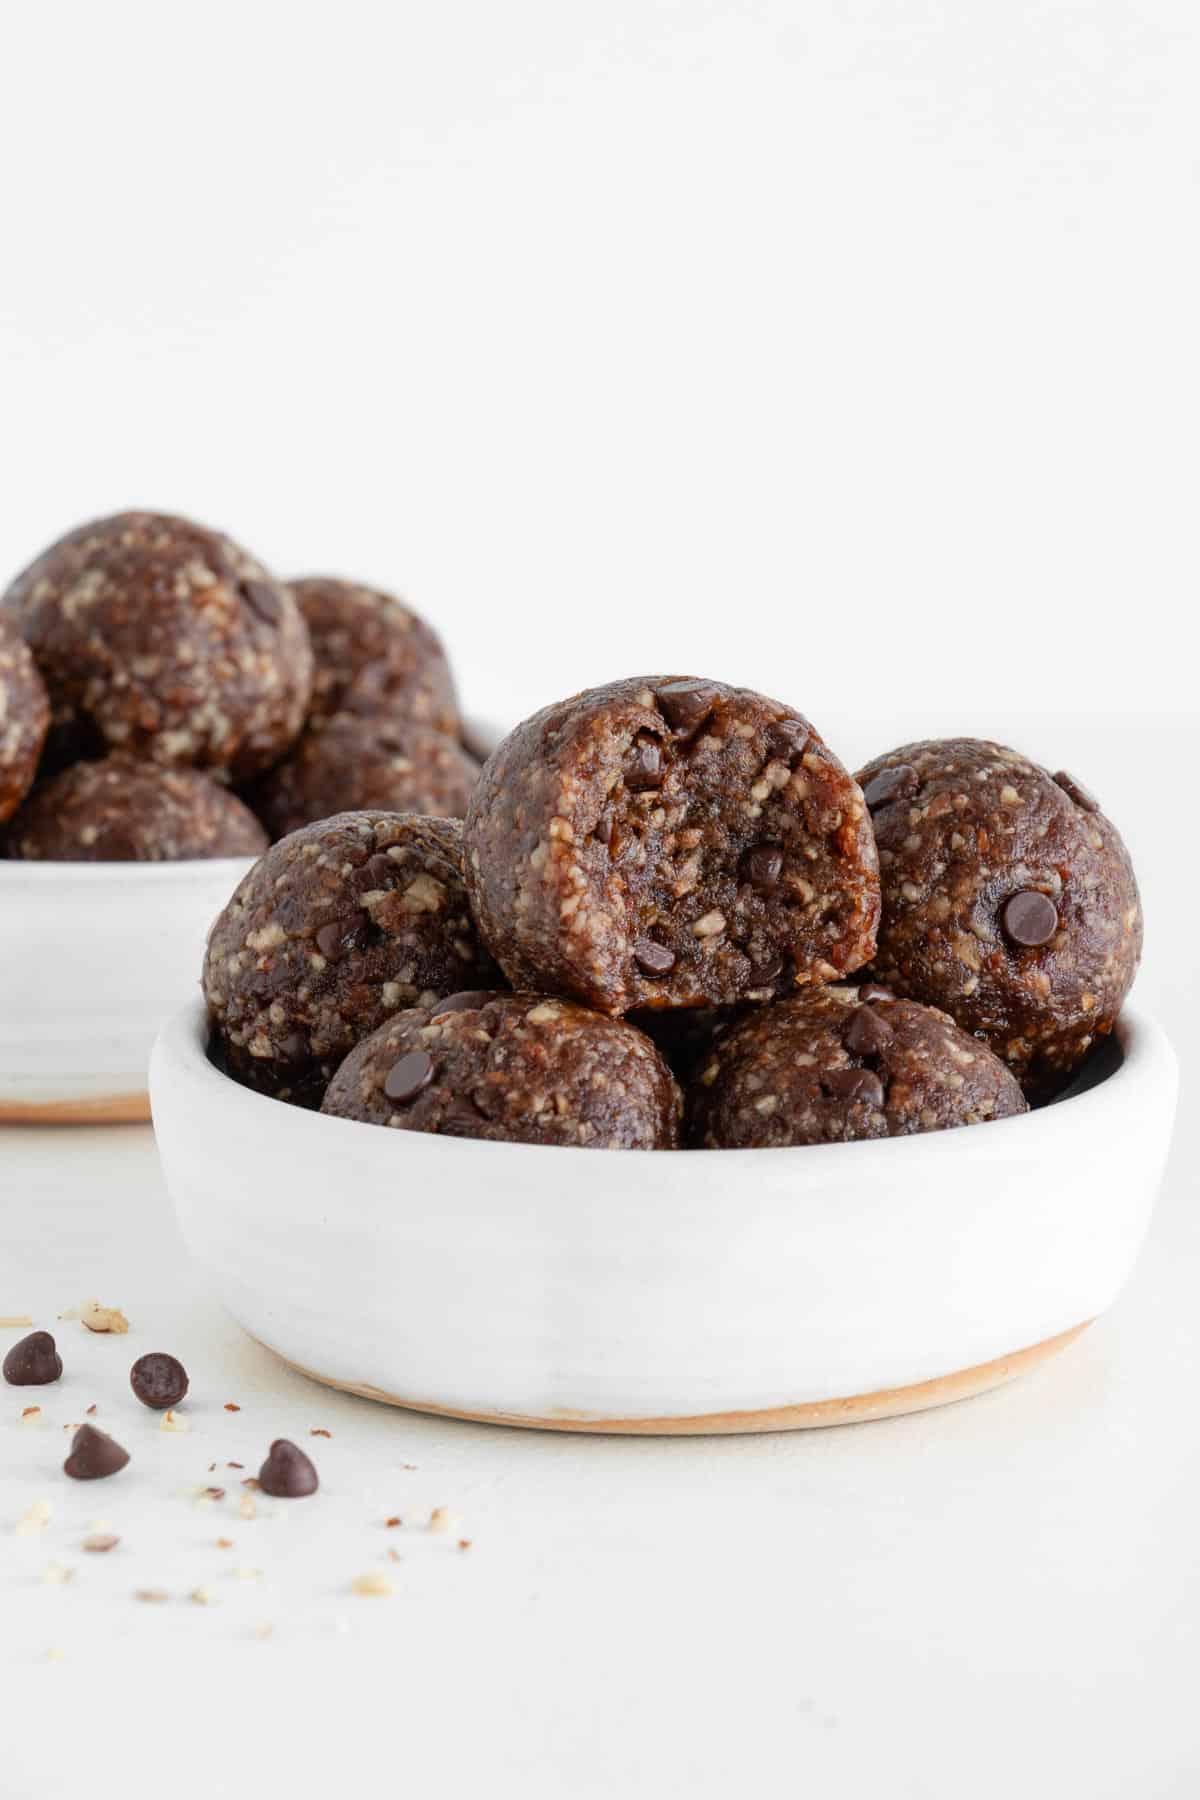 turtle energy balls stacked inside two small white bowls with a bite taken out of the center date ball